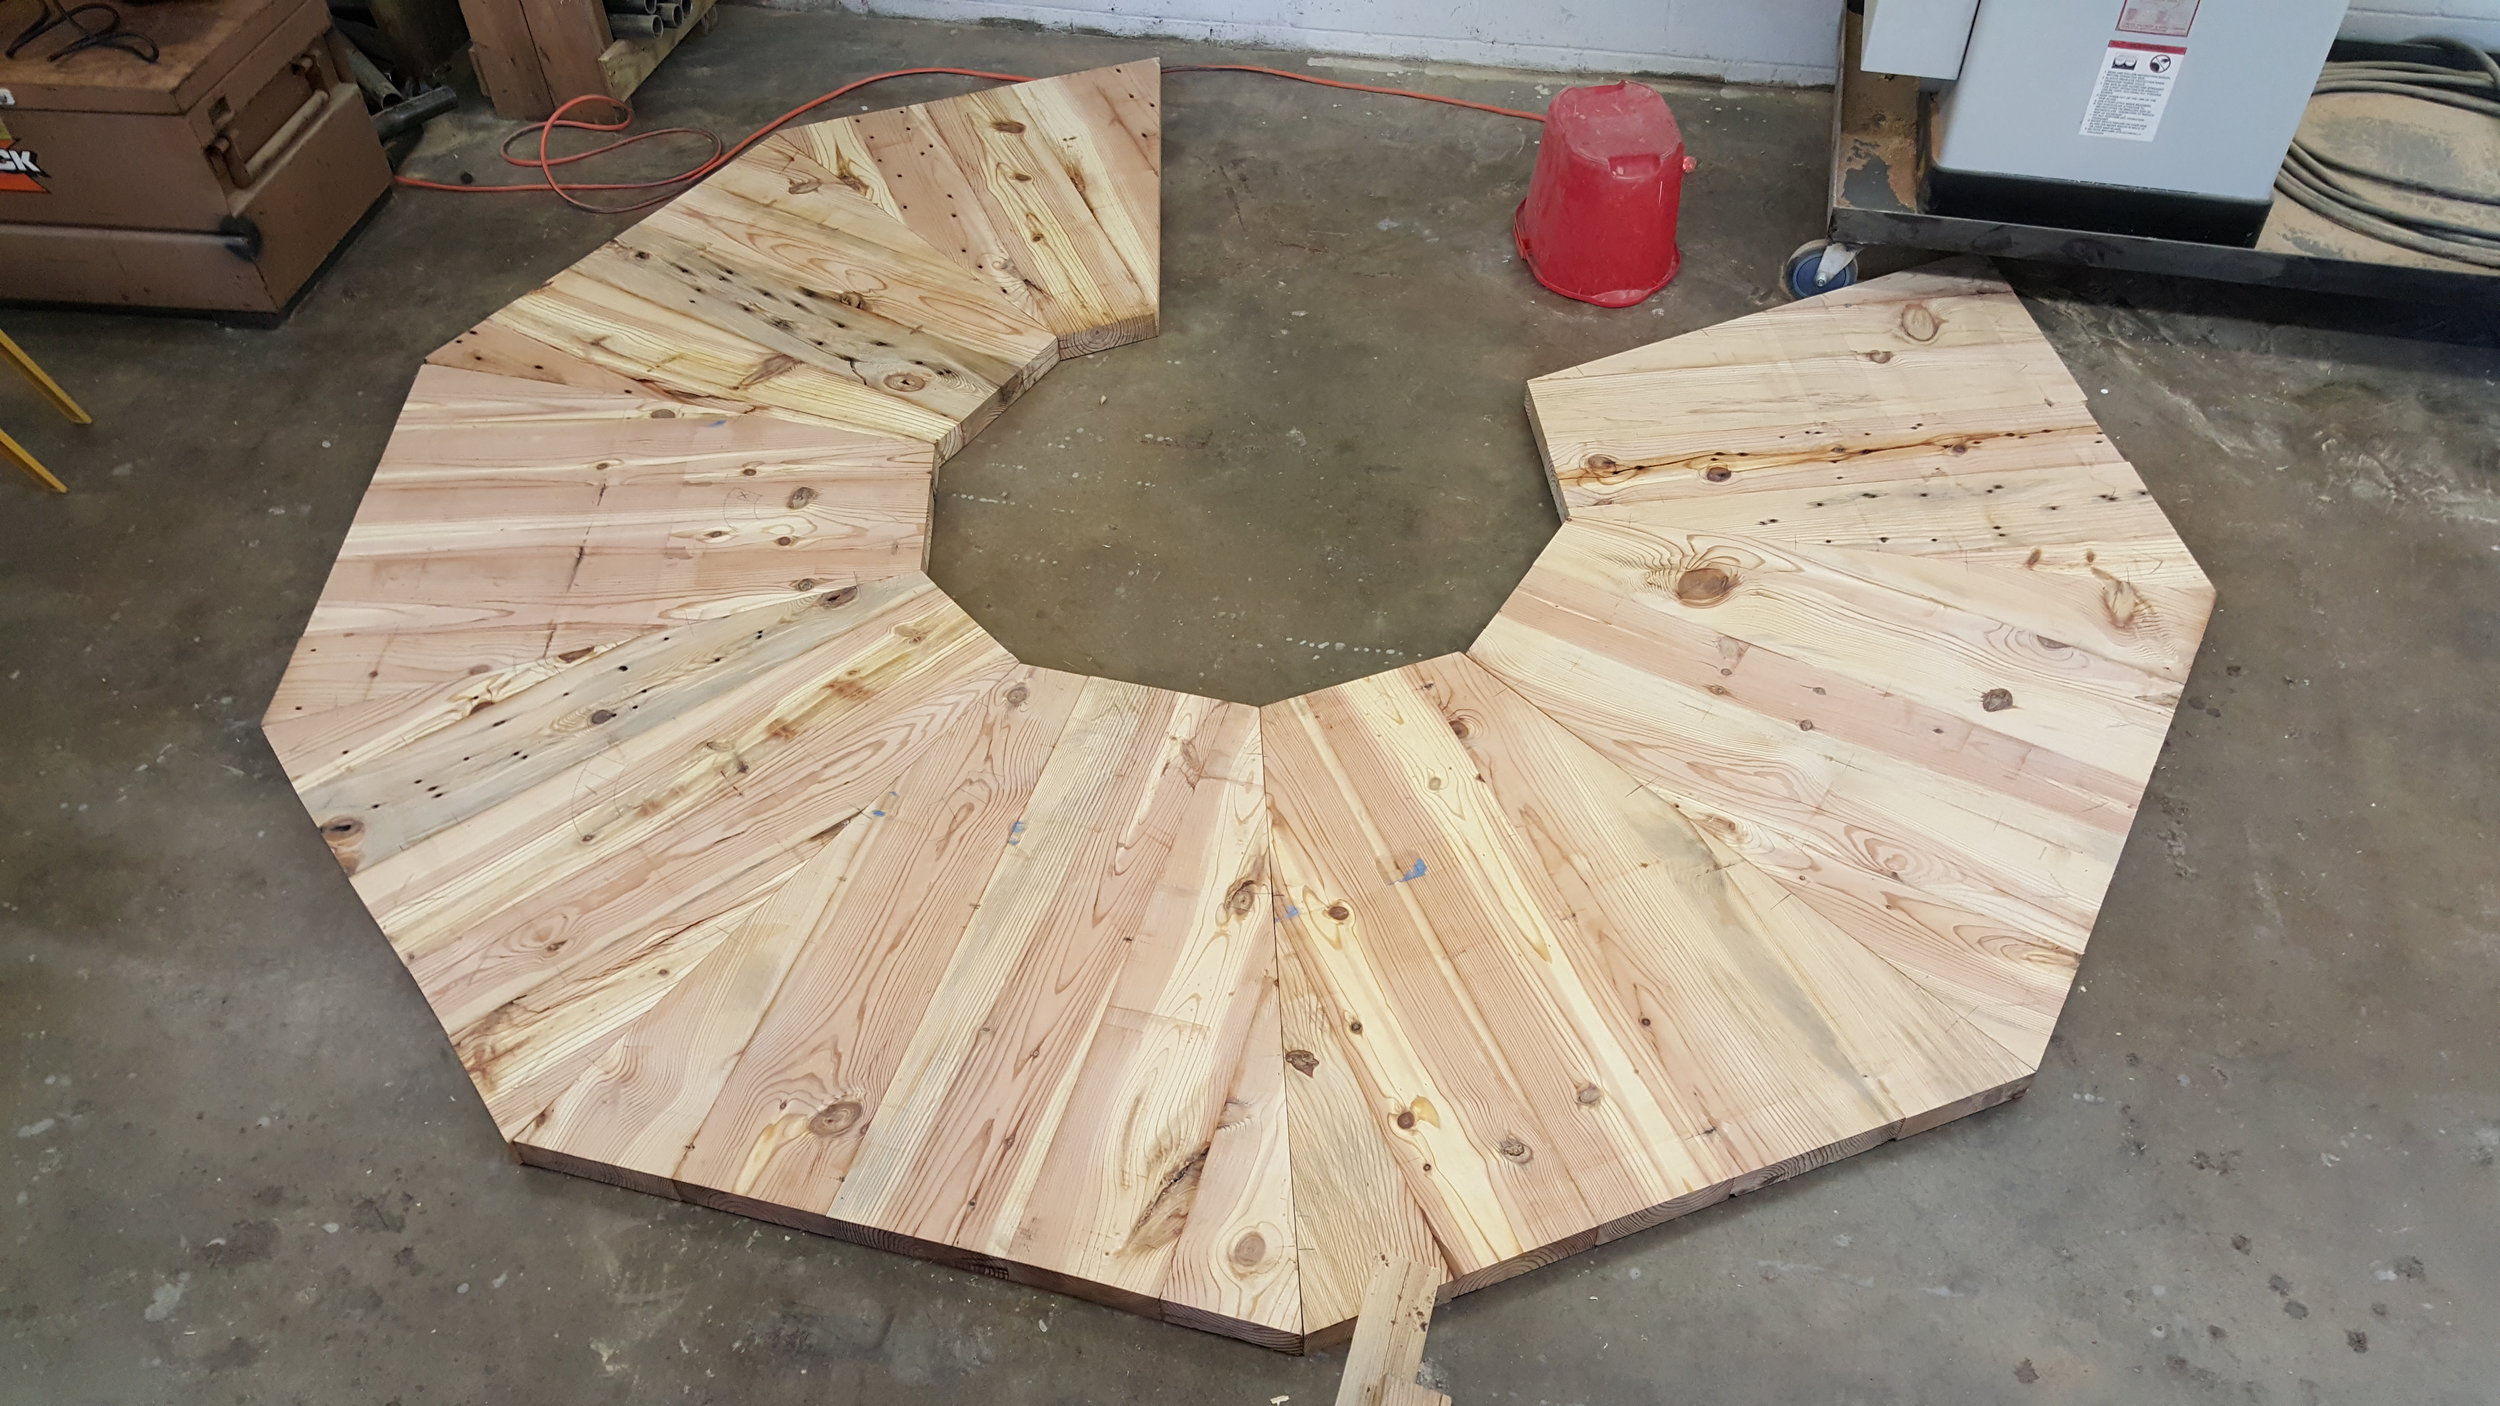  Ensuring the correct angle of each section was critical to ensuring the correct round shape. 